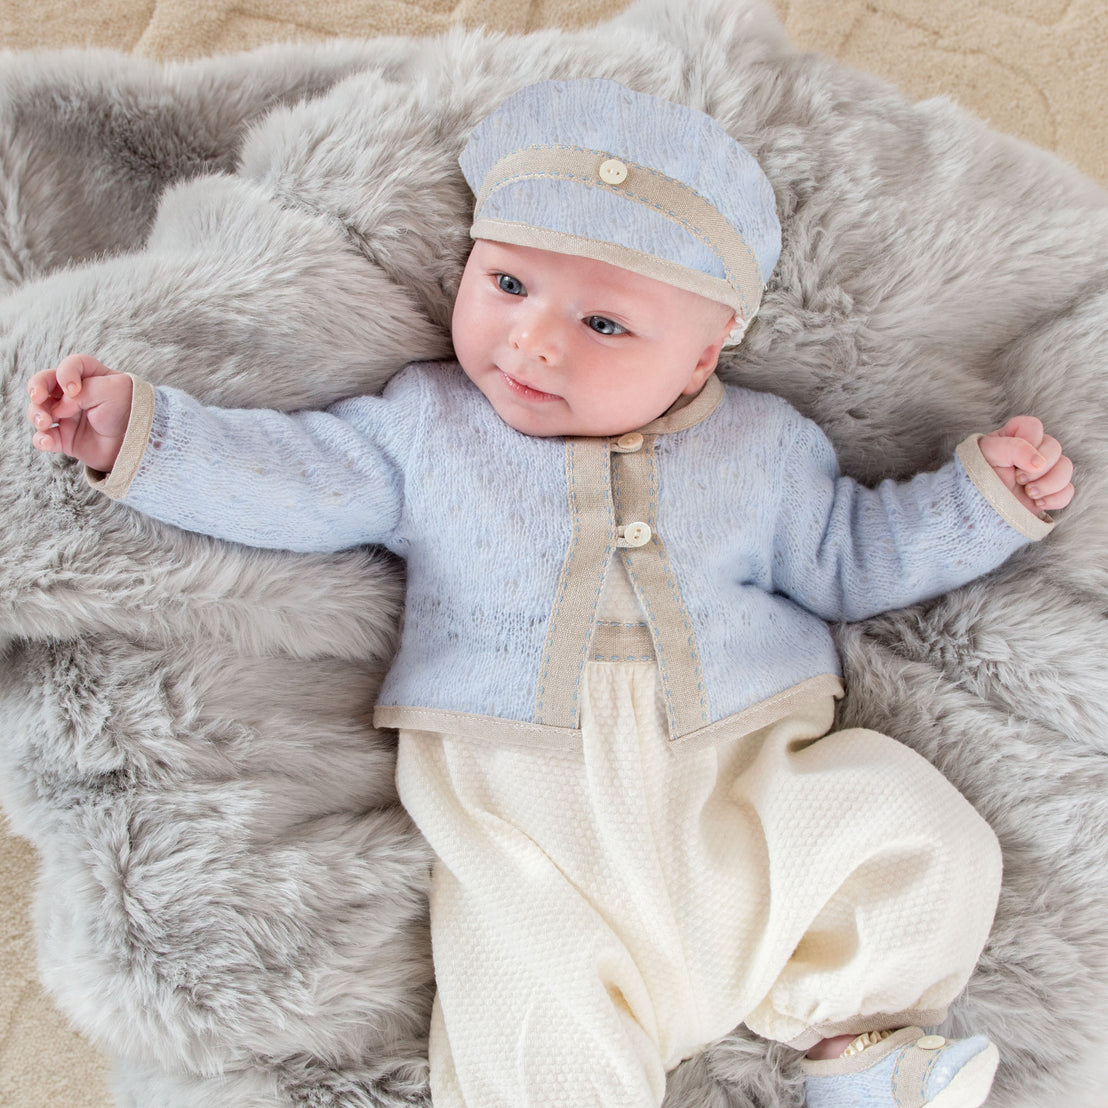 A smiling baby wearing an Austin Sweater and matching cap lies comfortably on a soft grey fur blanket.